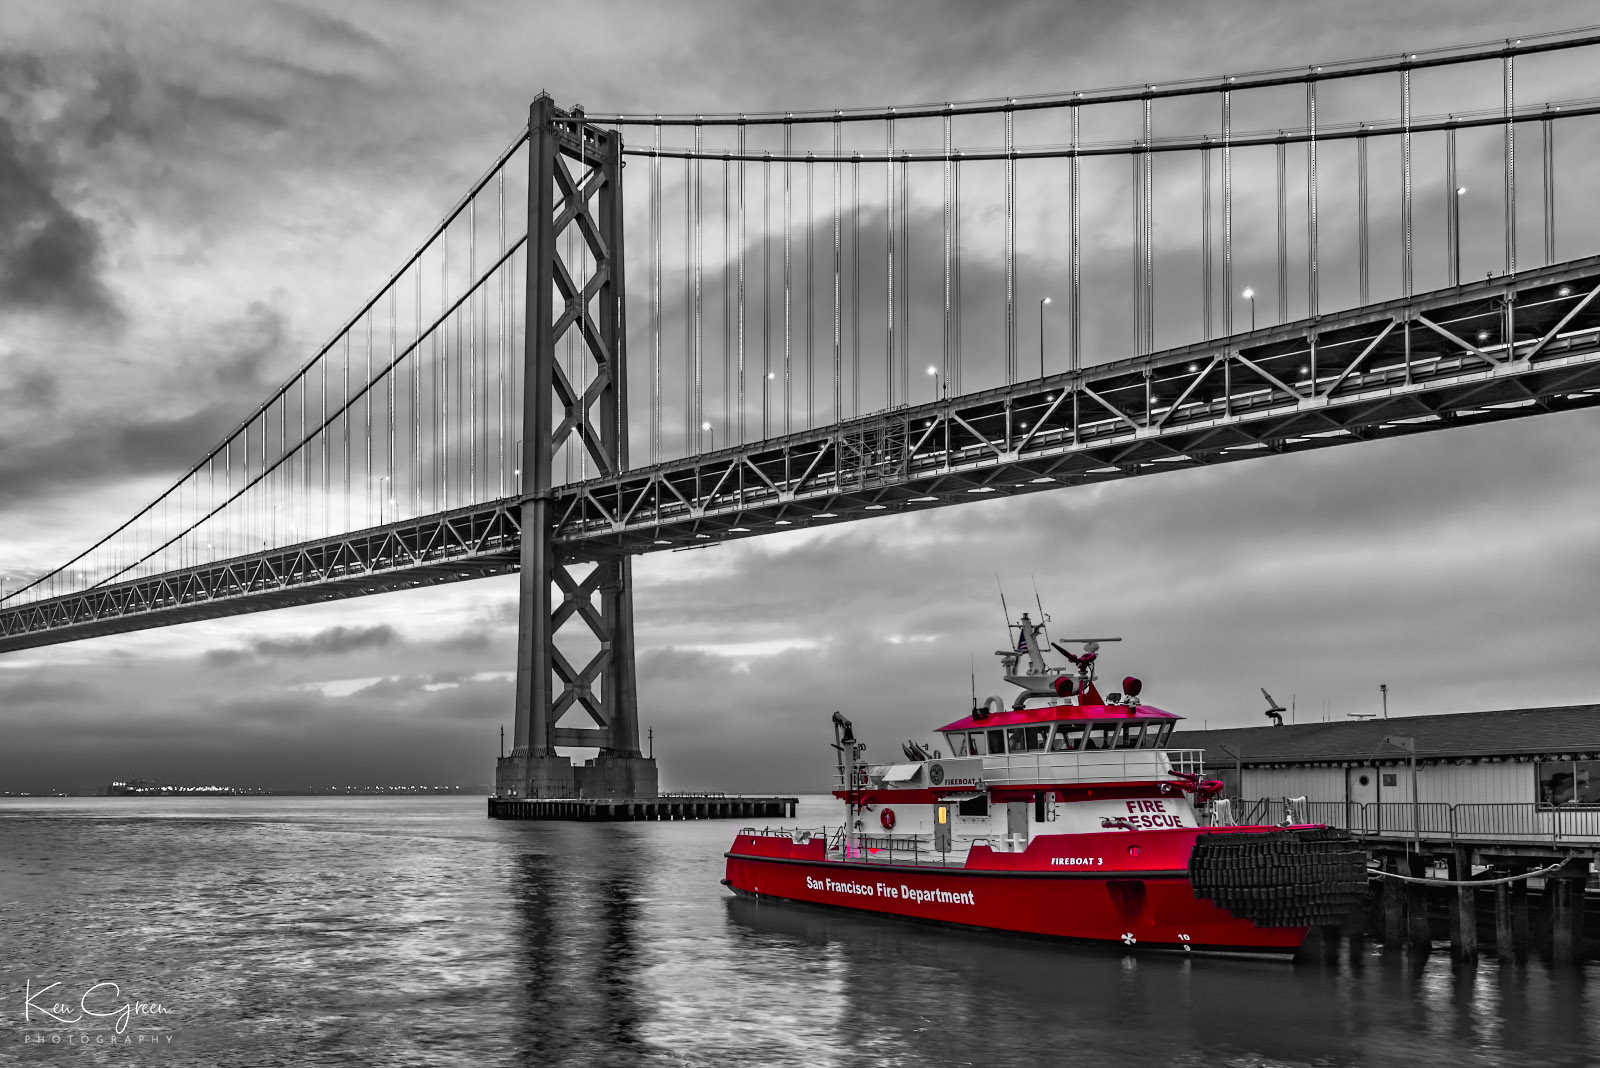 Whether created by nature or by people, San Francisco's bravest are always at the ready to bring calm to whatever storm they'...